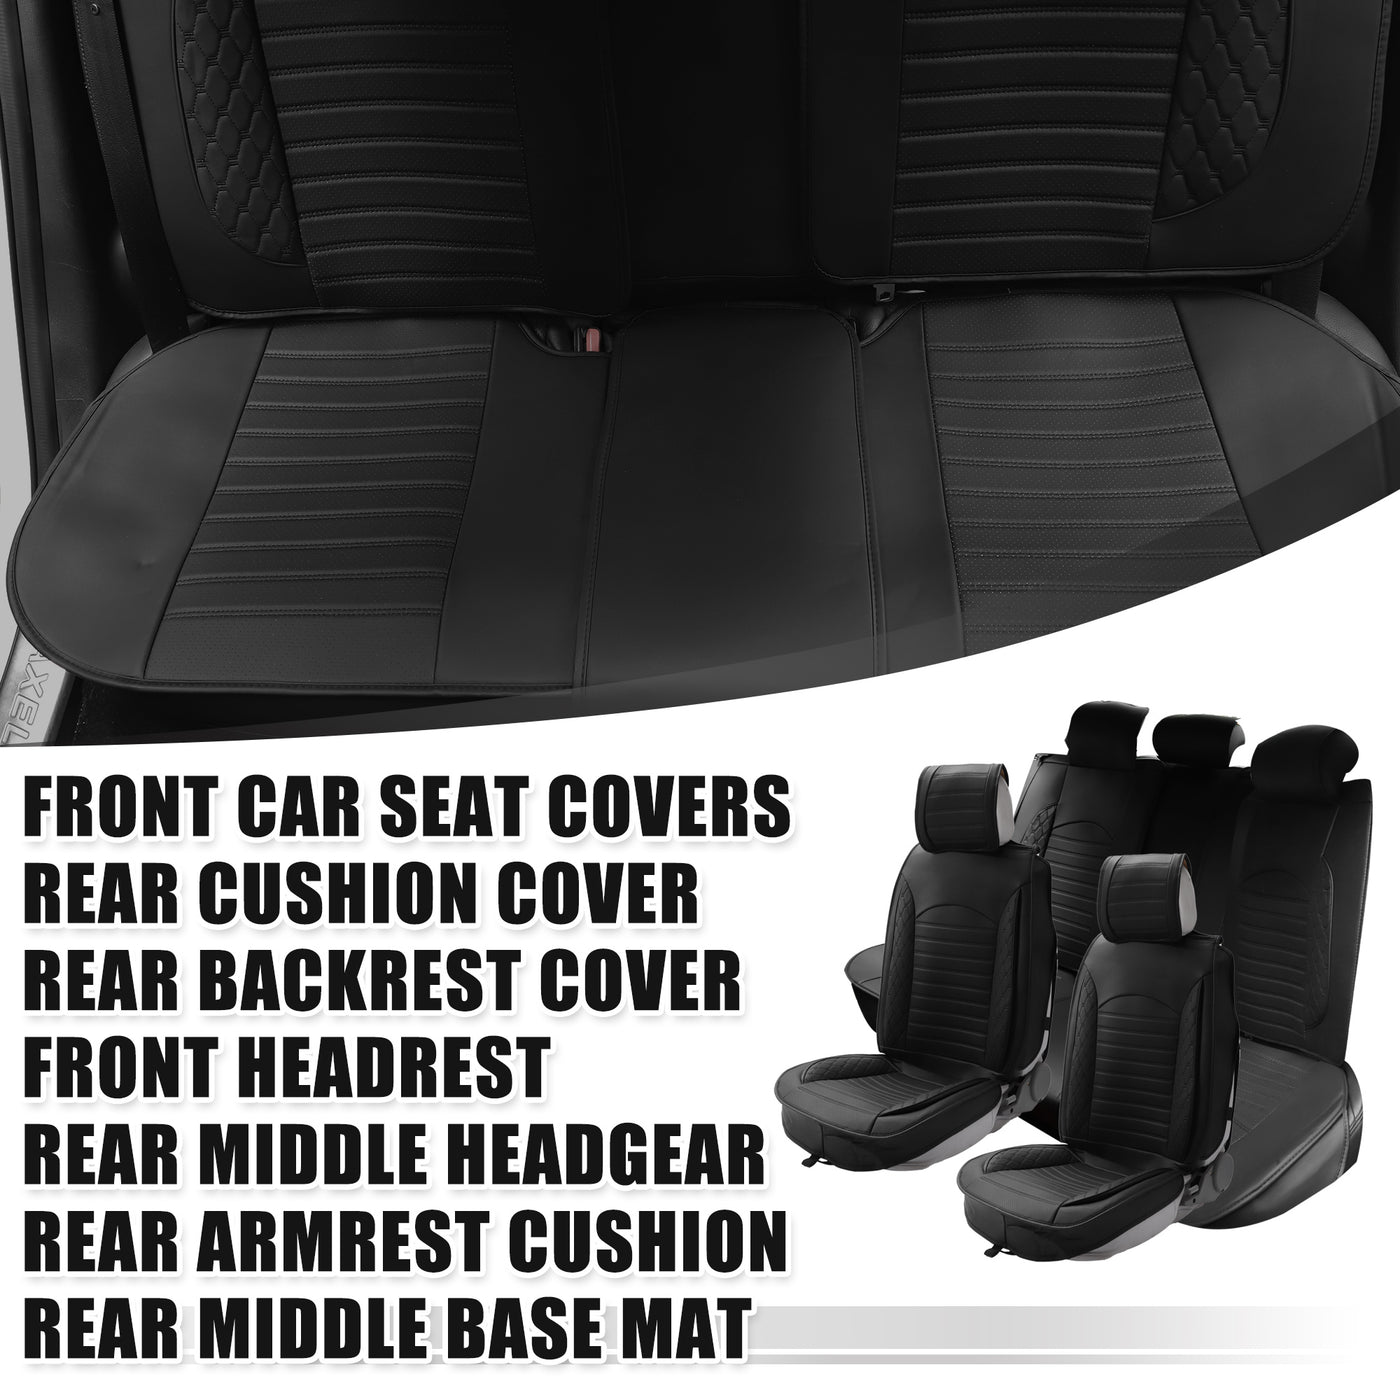 ACROPIX Full Set Universal Leather Car Seat Covers Seat Cushion Protectors for 5 Seat SUV Pick-up Truck Vehicle Interior Accessories Waterproof Non-Slip Black - Pack of 11